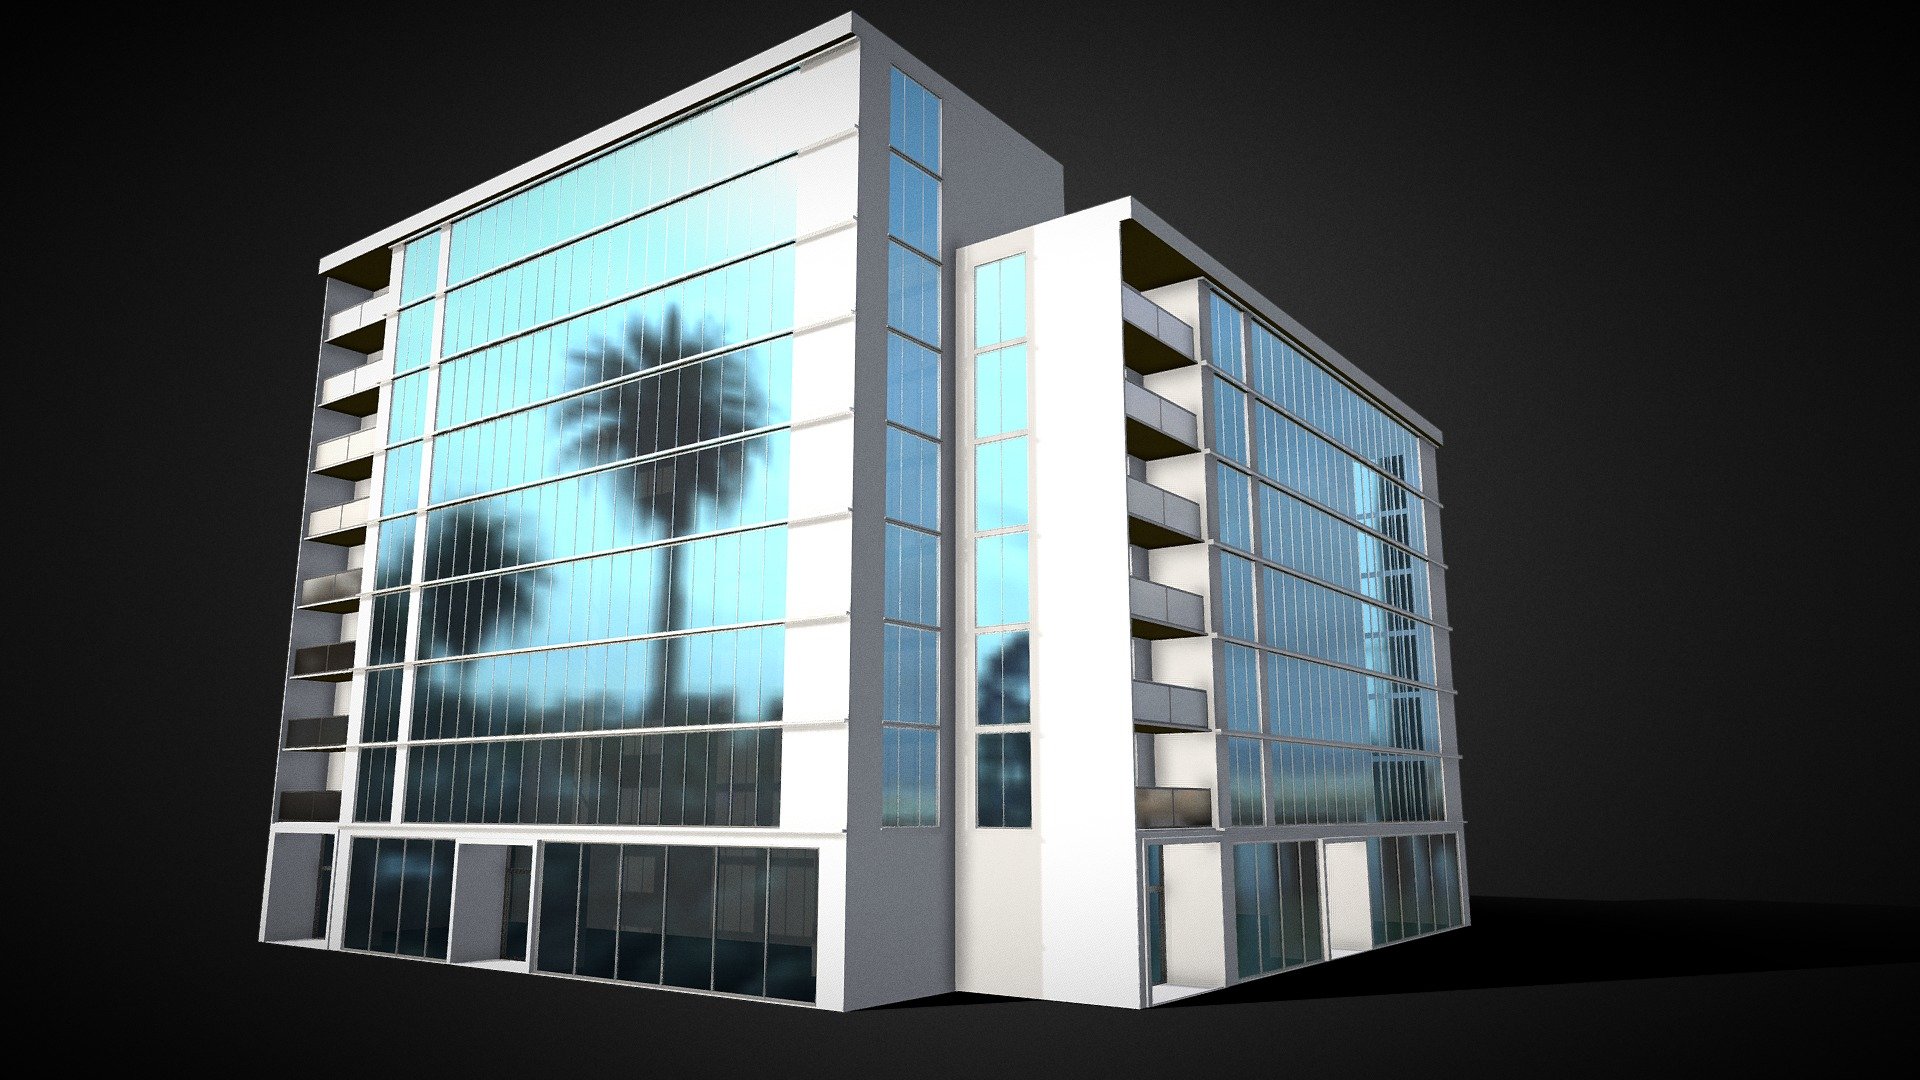 Miami building 2  to support your architectural creations. With this building constructed from individual pieces you can deconstruct and rebuild as you wish to create your buildings 3d model